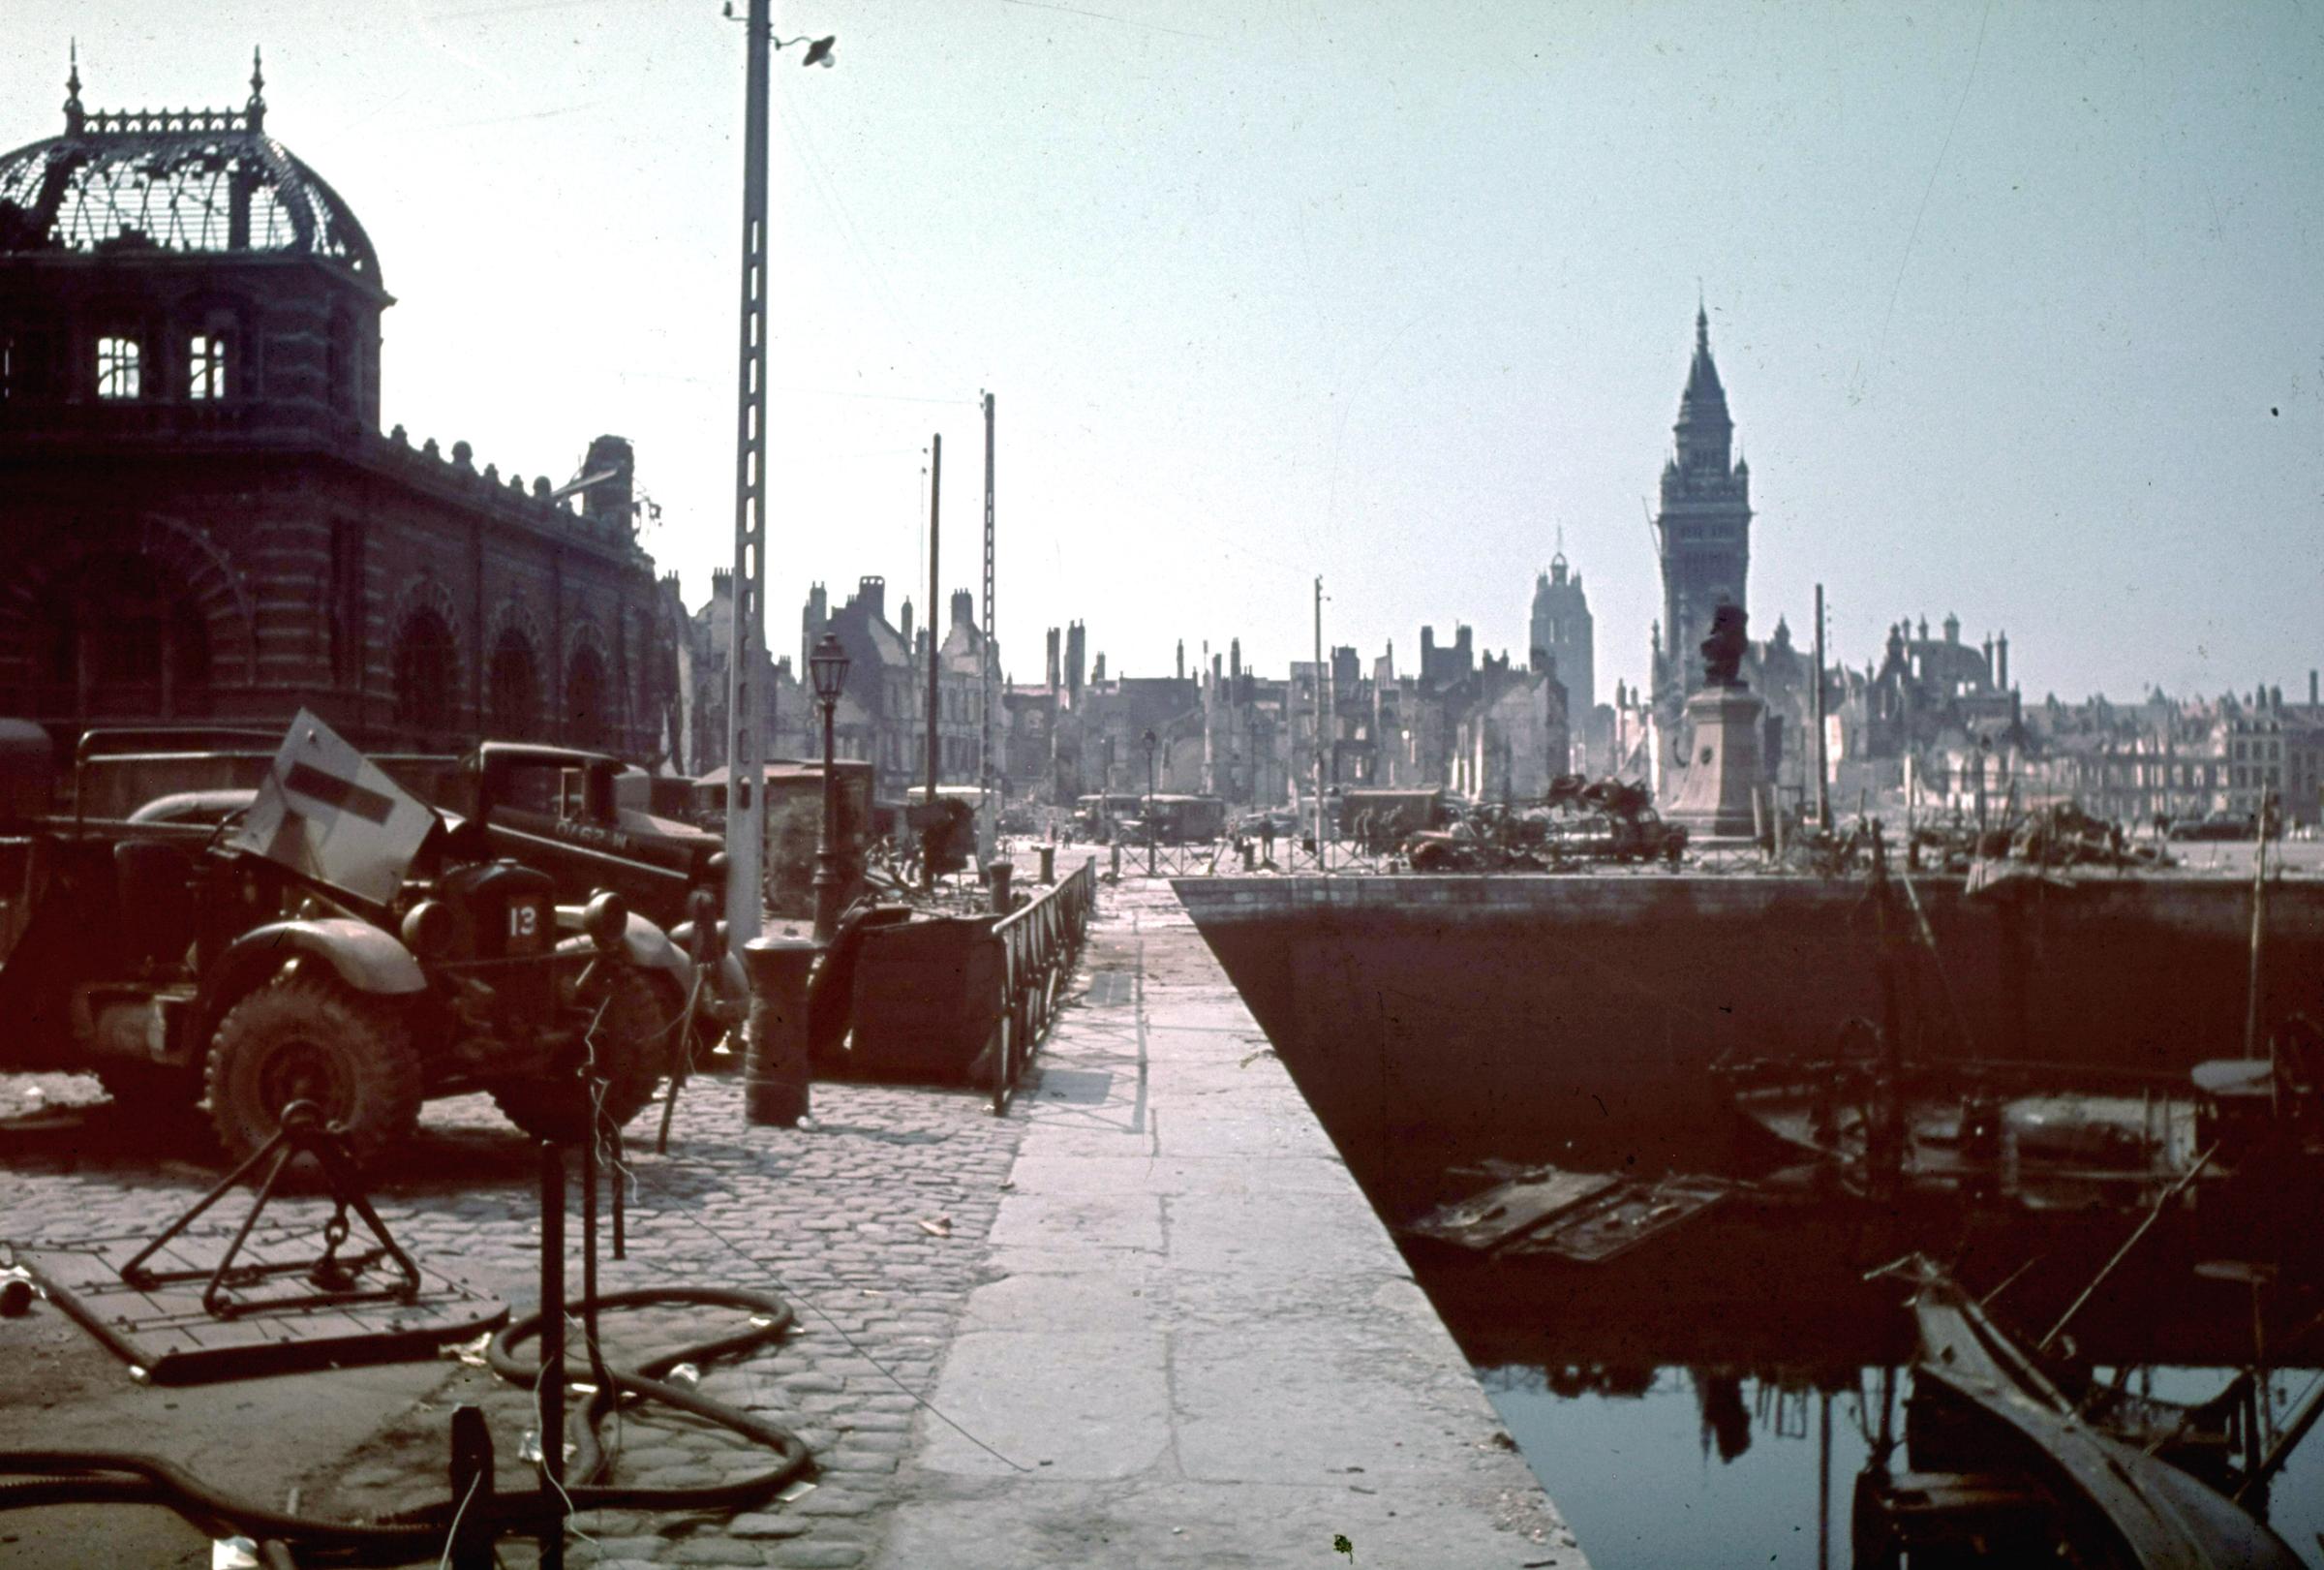 Dunkirk after British bombardment and retreat. 1940.